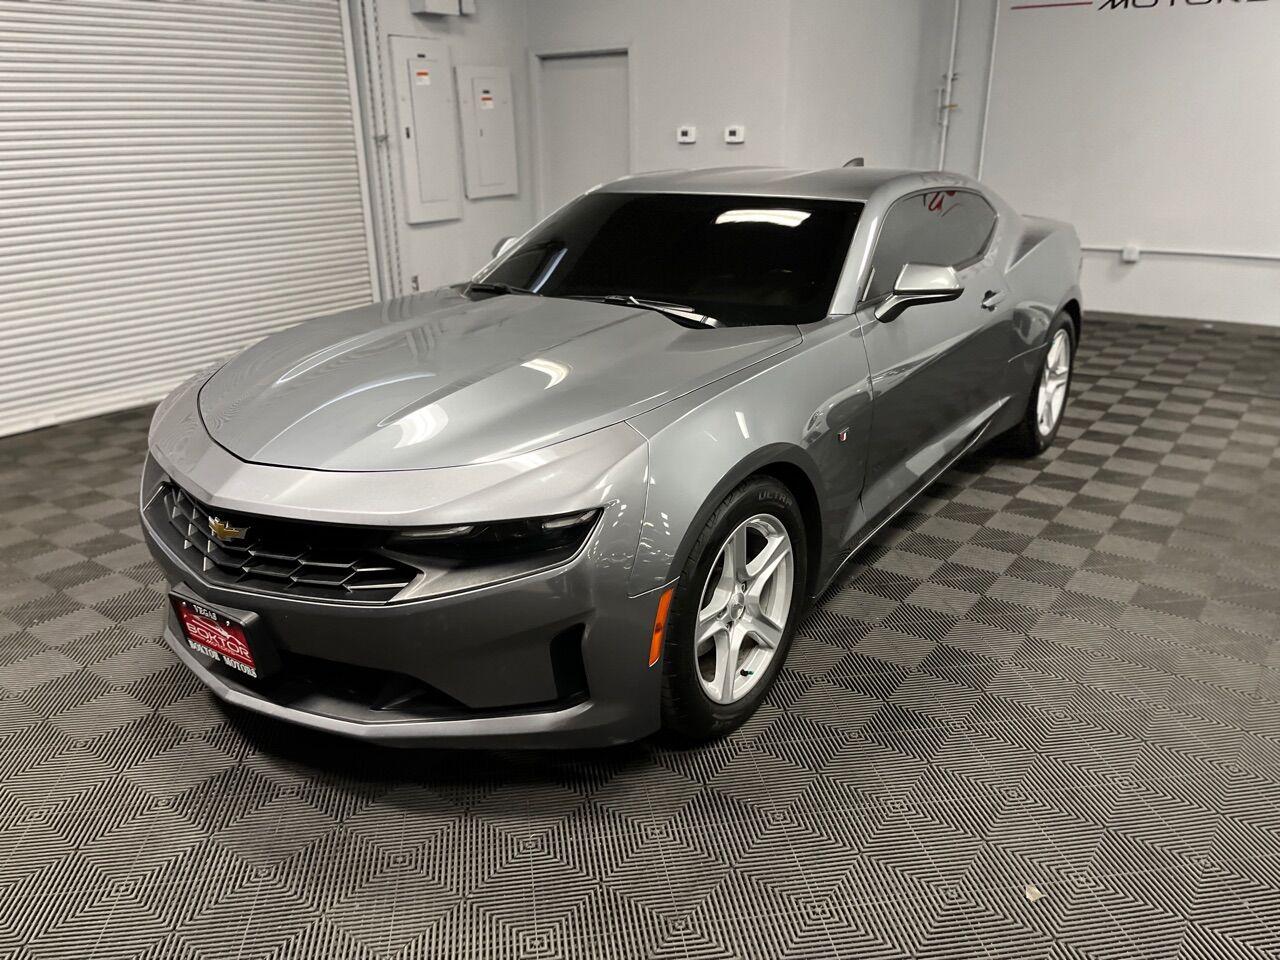 Used 2020 Chevrolet Camaro LT 2dr Coupe w/1LT For Sale (Sold 